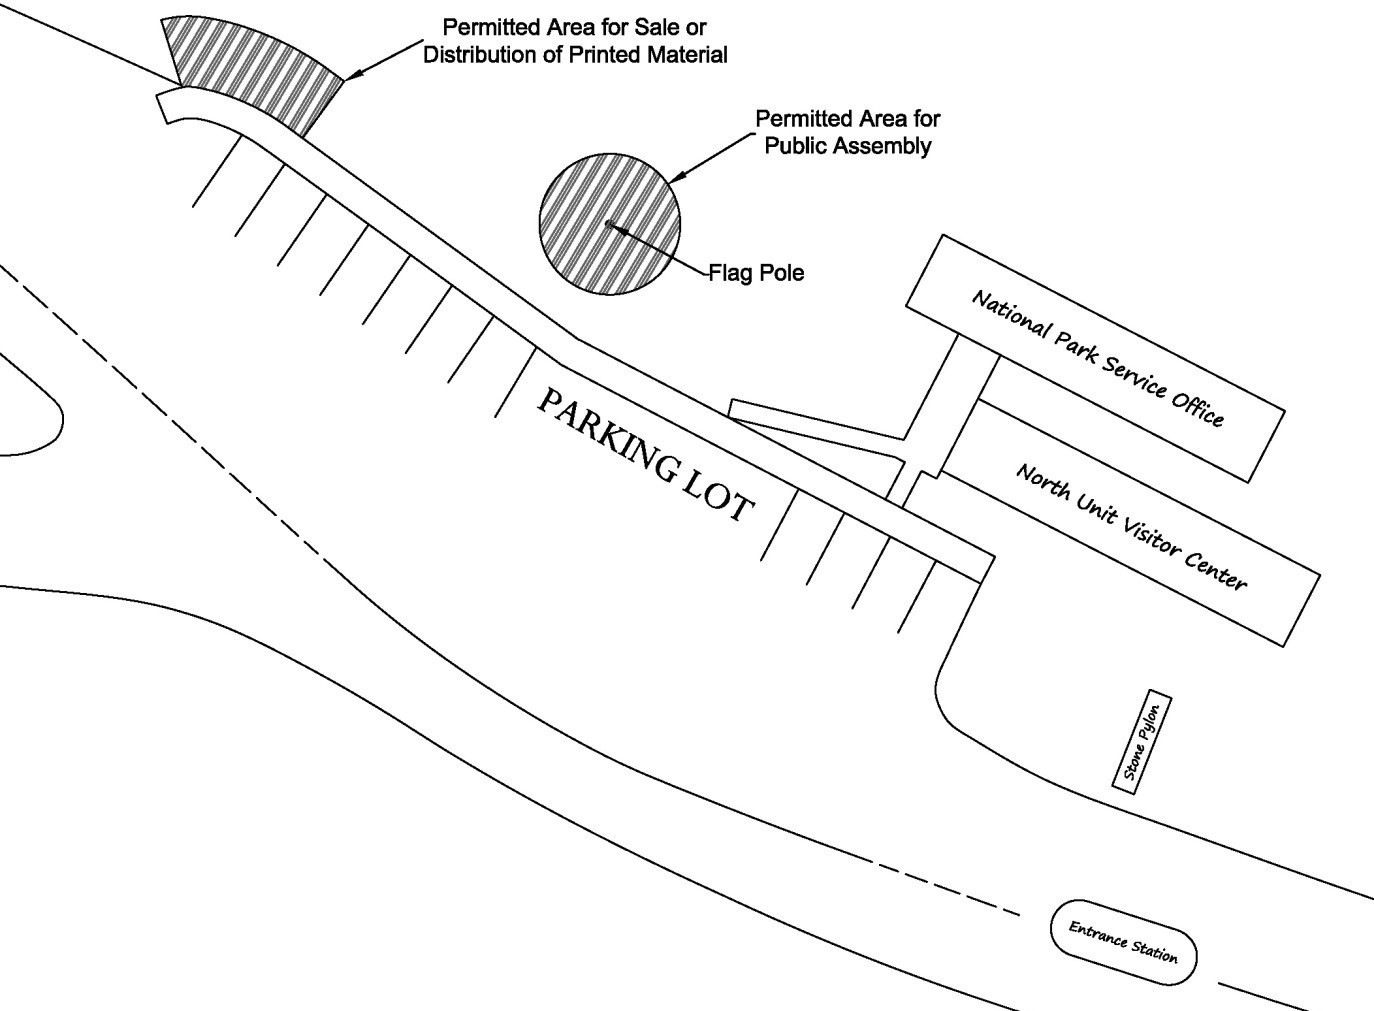 A simple map of the North Unit Visitor Center area in which shaded areas indicate areas for demonstrations and distribution of printed matter. Locations shown are described in the accompanying document text.